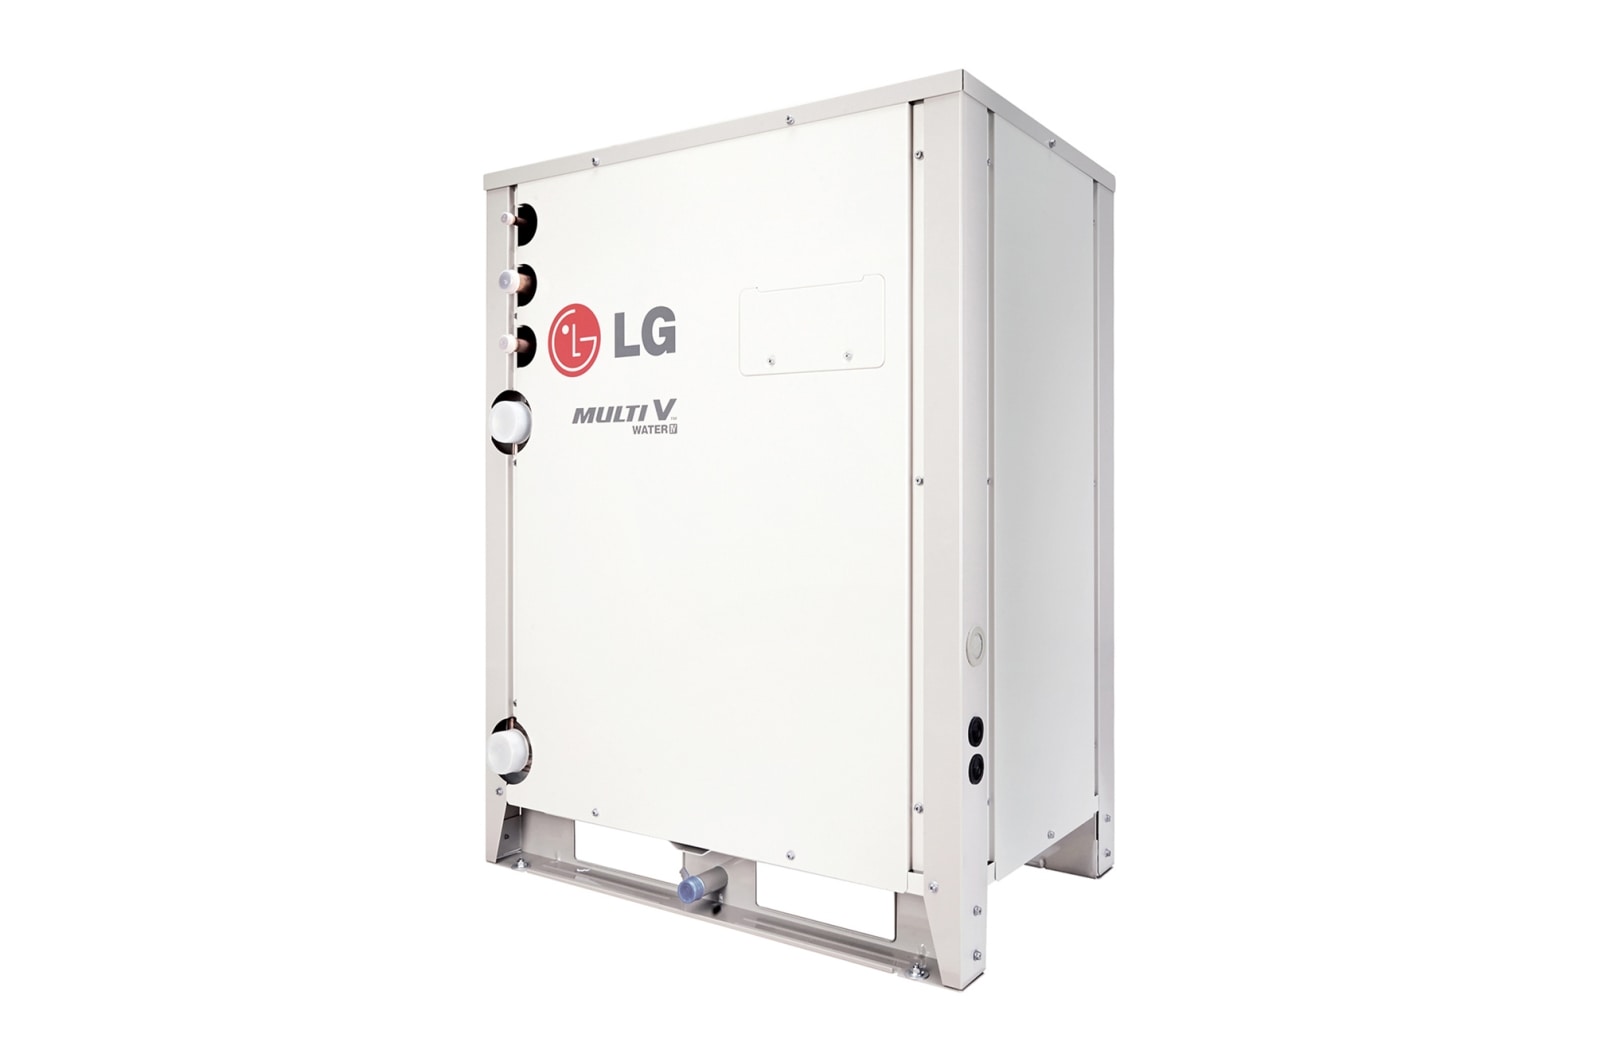 LG MULTI V WATER 5, Water Heat Recovery, Outdoor Unit, 8HP, R410A, ARWM080LAS5